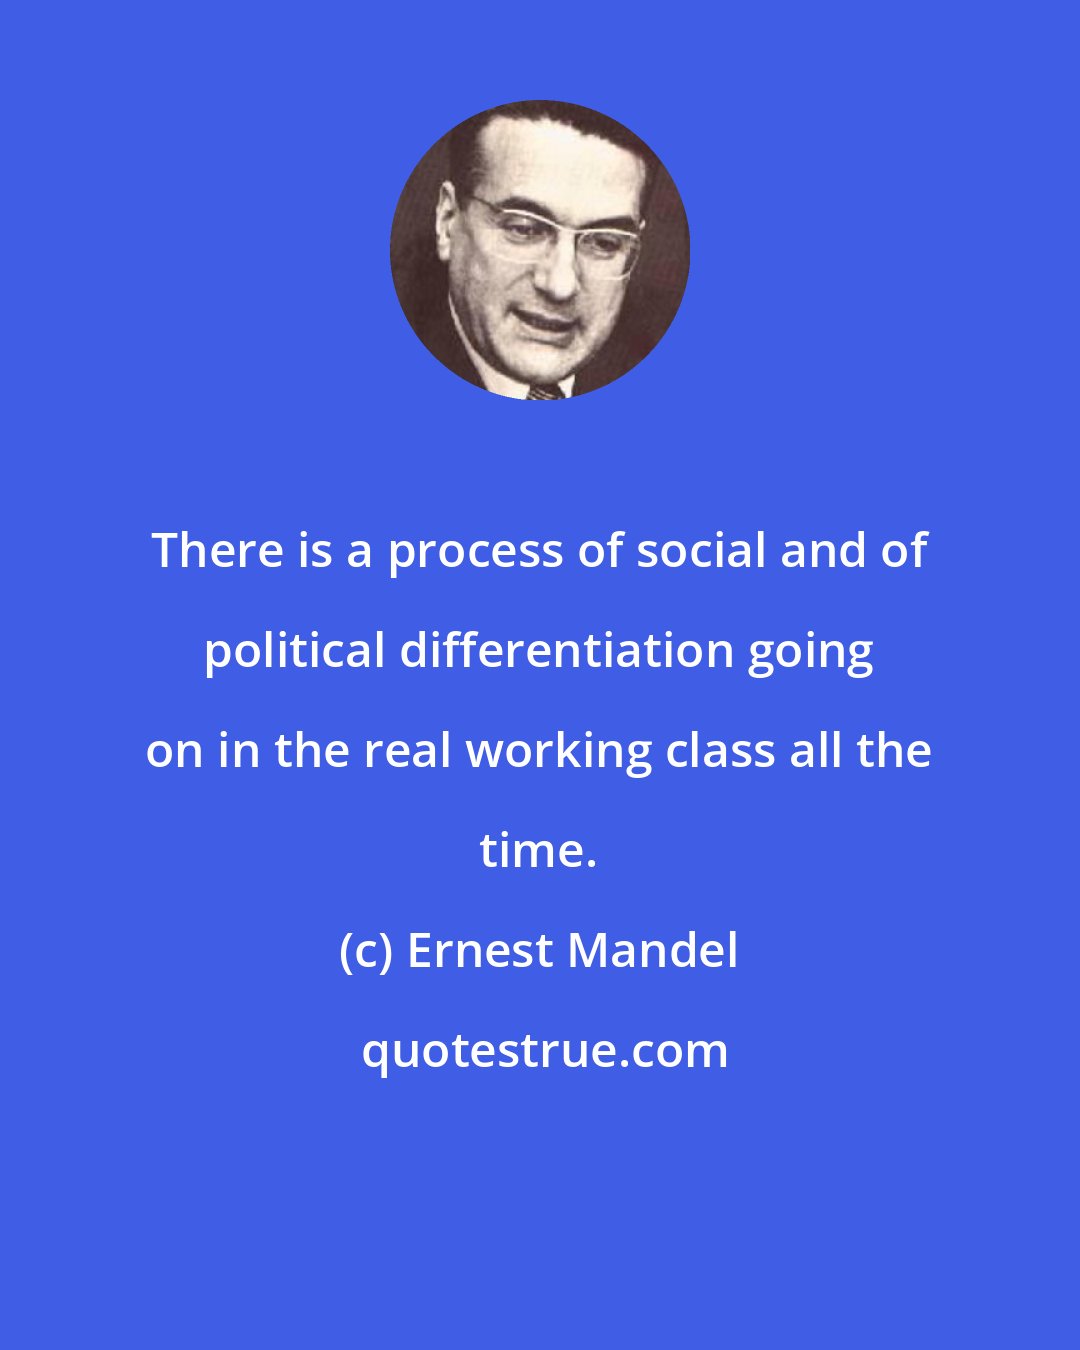 Ernest Mandel: There is a process of social and of political differentiation going on in the real working class all the time.